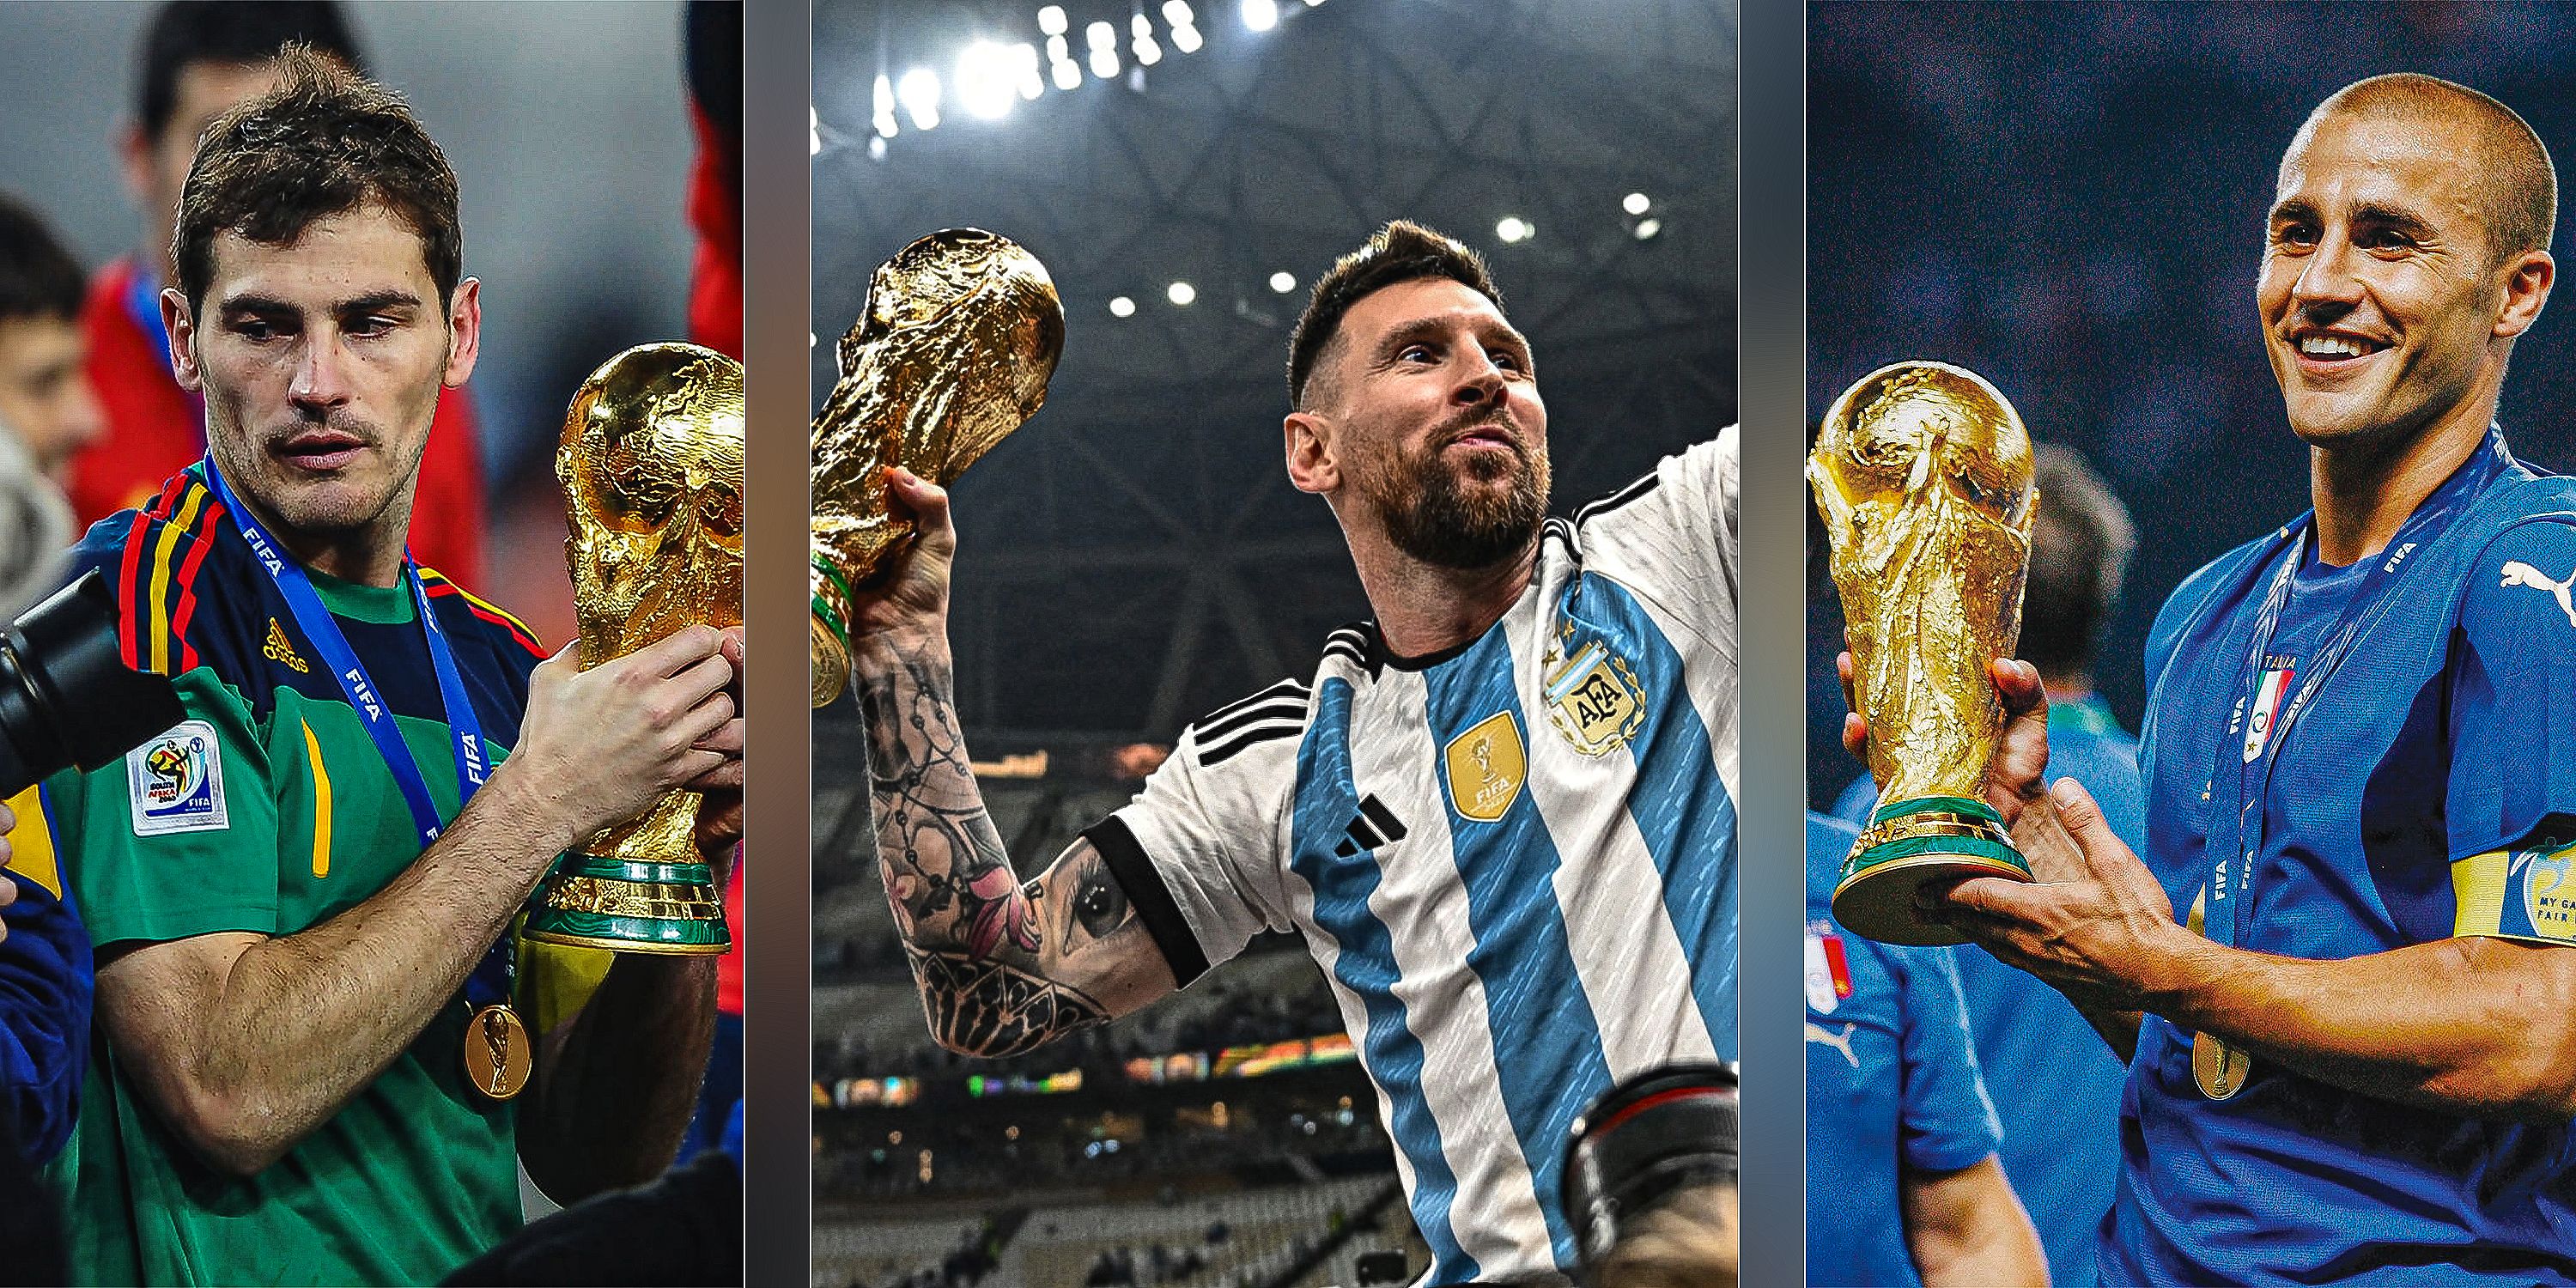 Spain's Iker Casillas, Argentina's Lionel Messi and Italy's Fabio Cannavaro holding the World Cup.